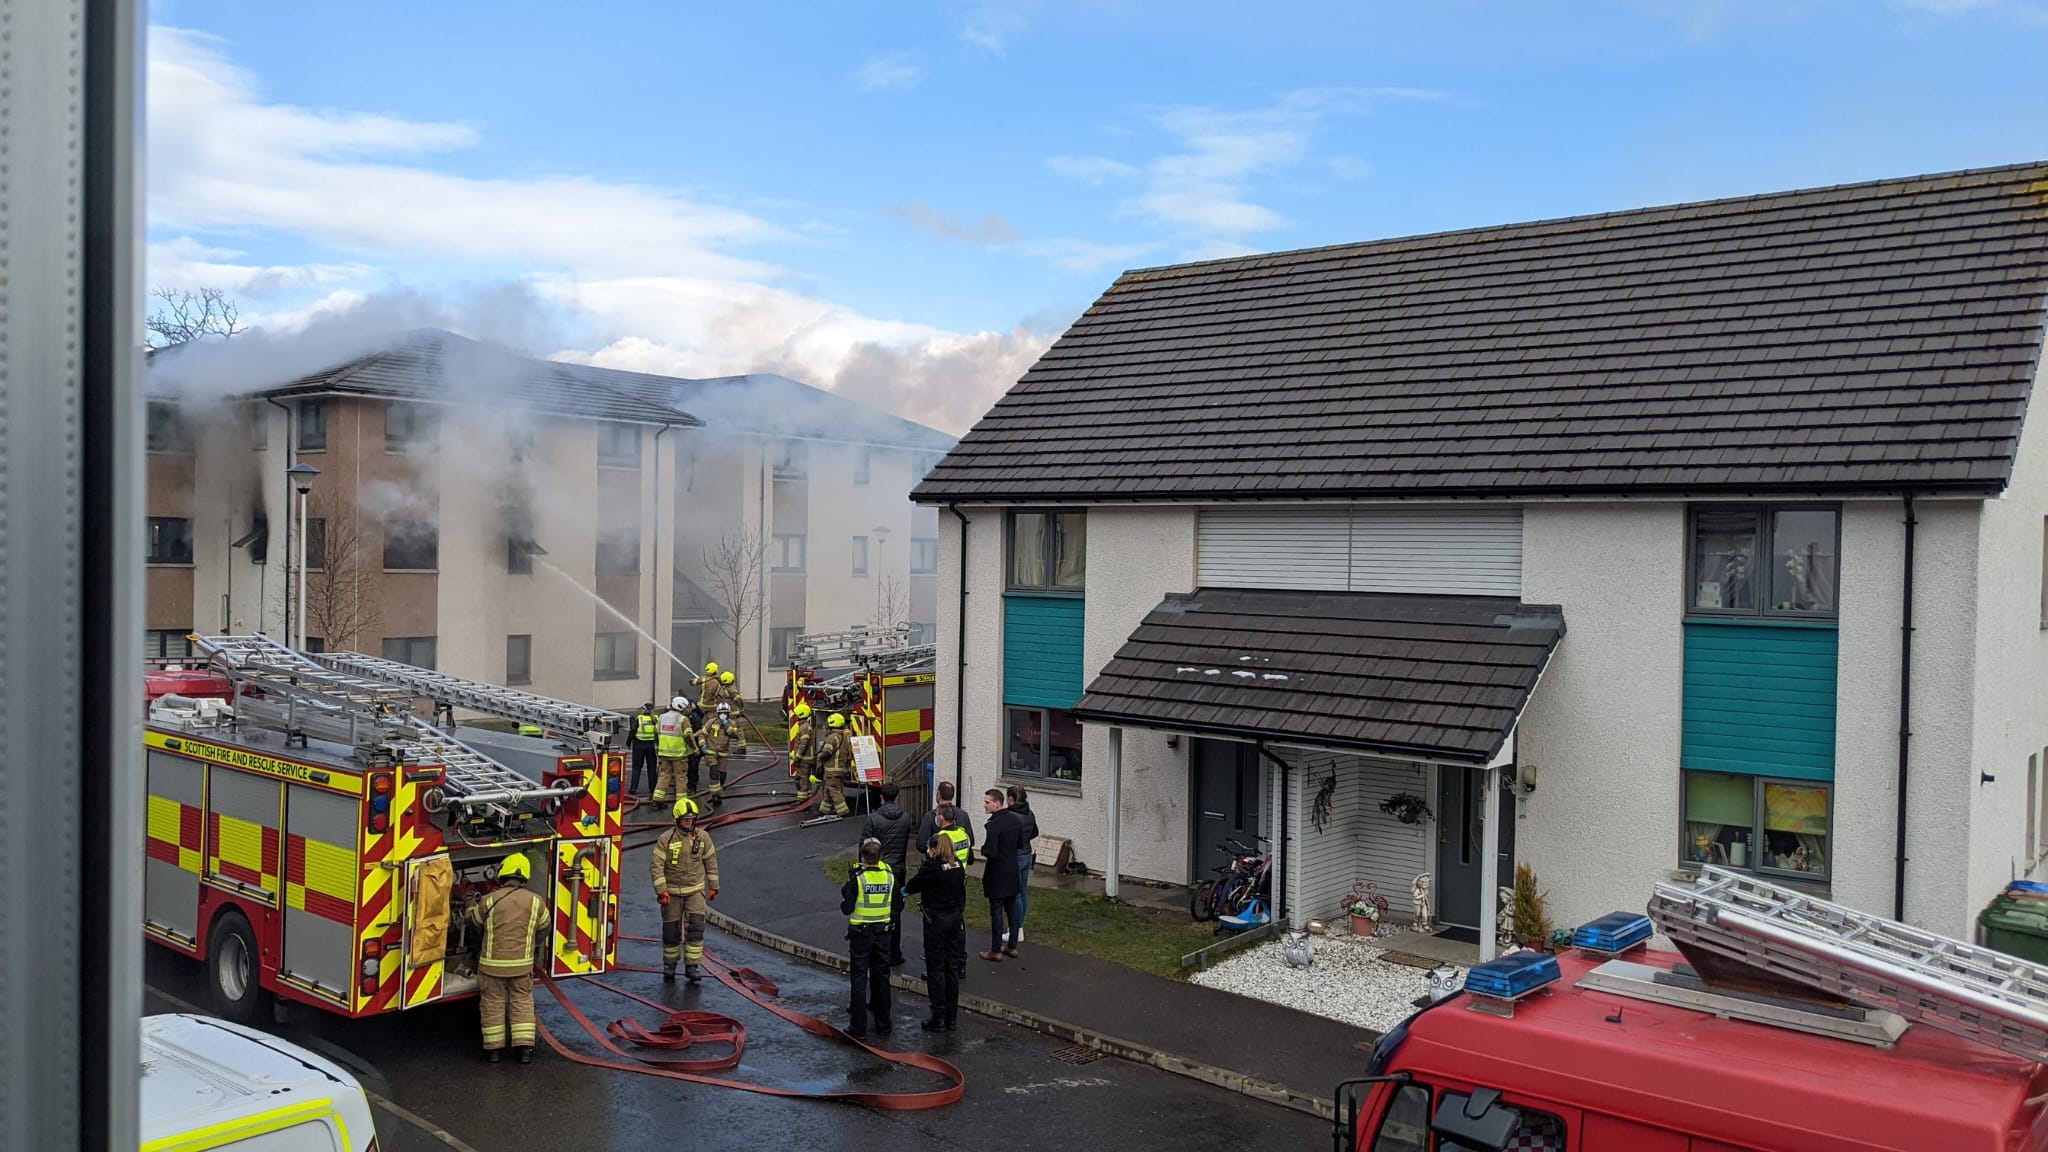 Firefihghters tackled the blaze inside a flat on Polvanie View, Inverness.